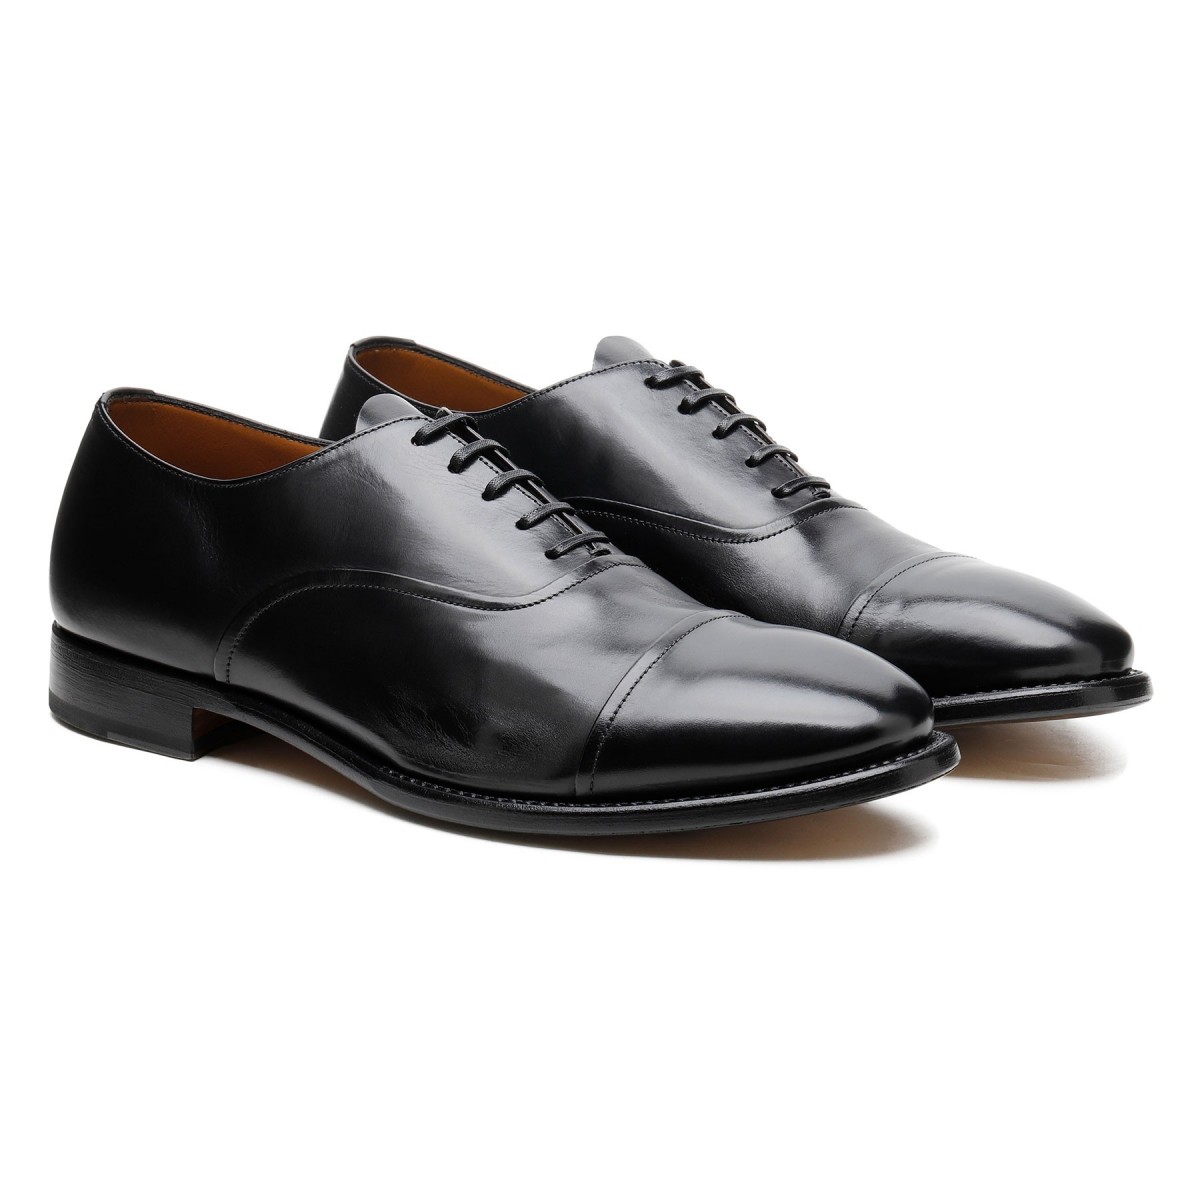 Black leather Derby shoes